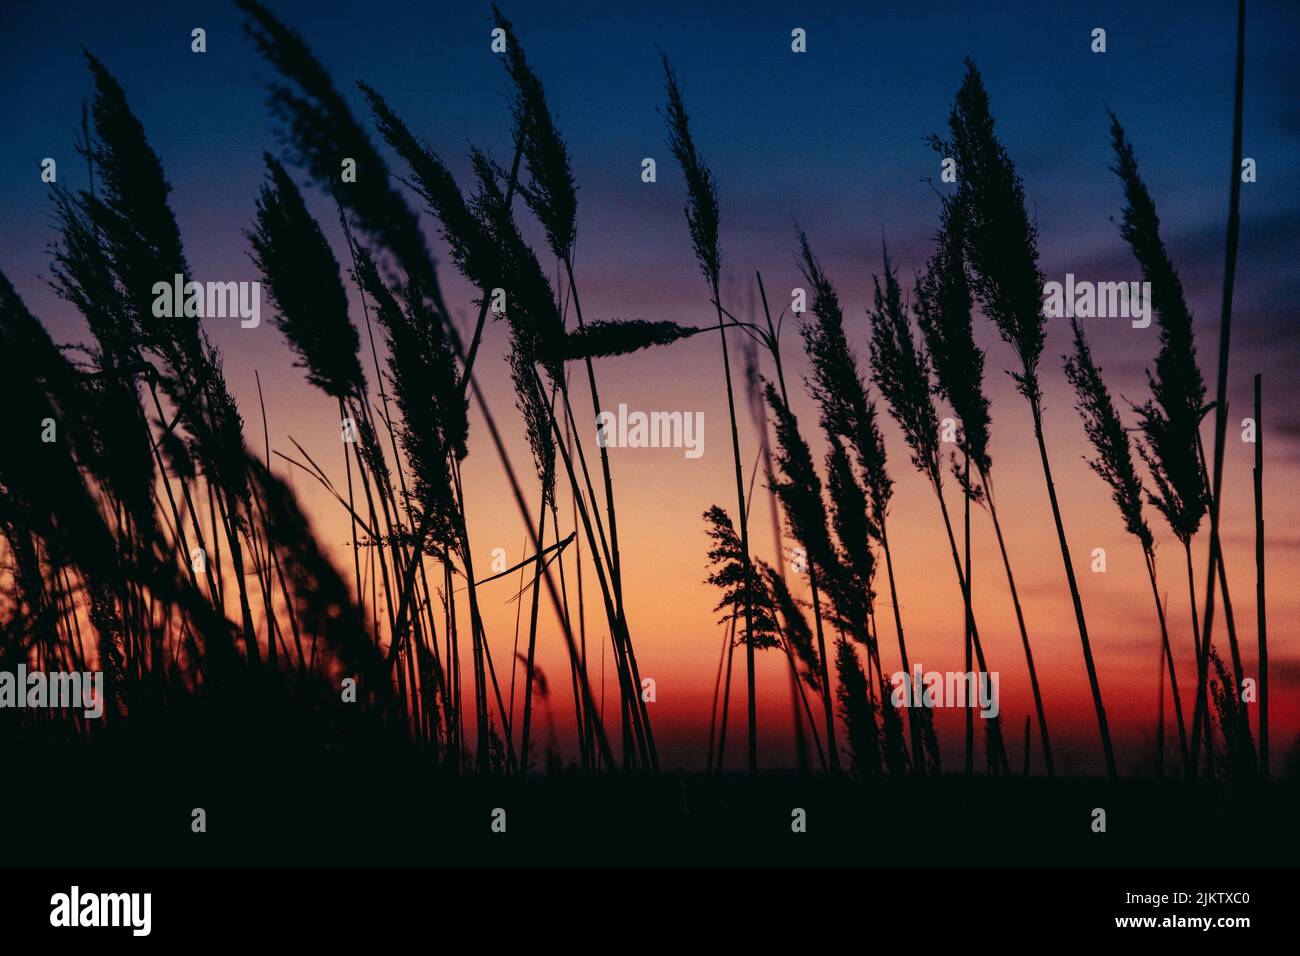 Lush grass silhouette against a colorful sunset sky Stock Photo